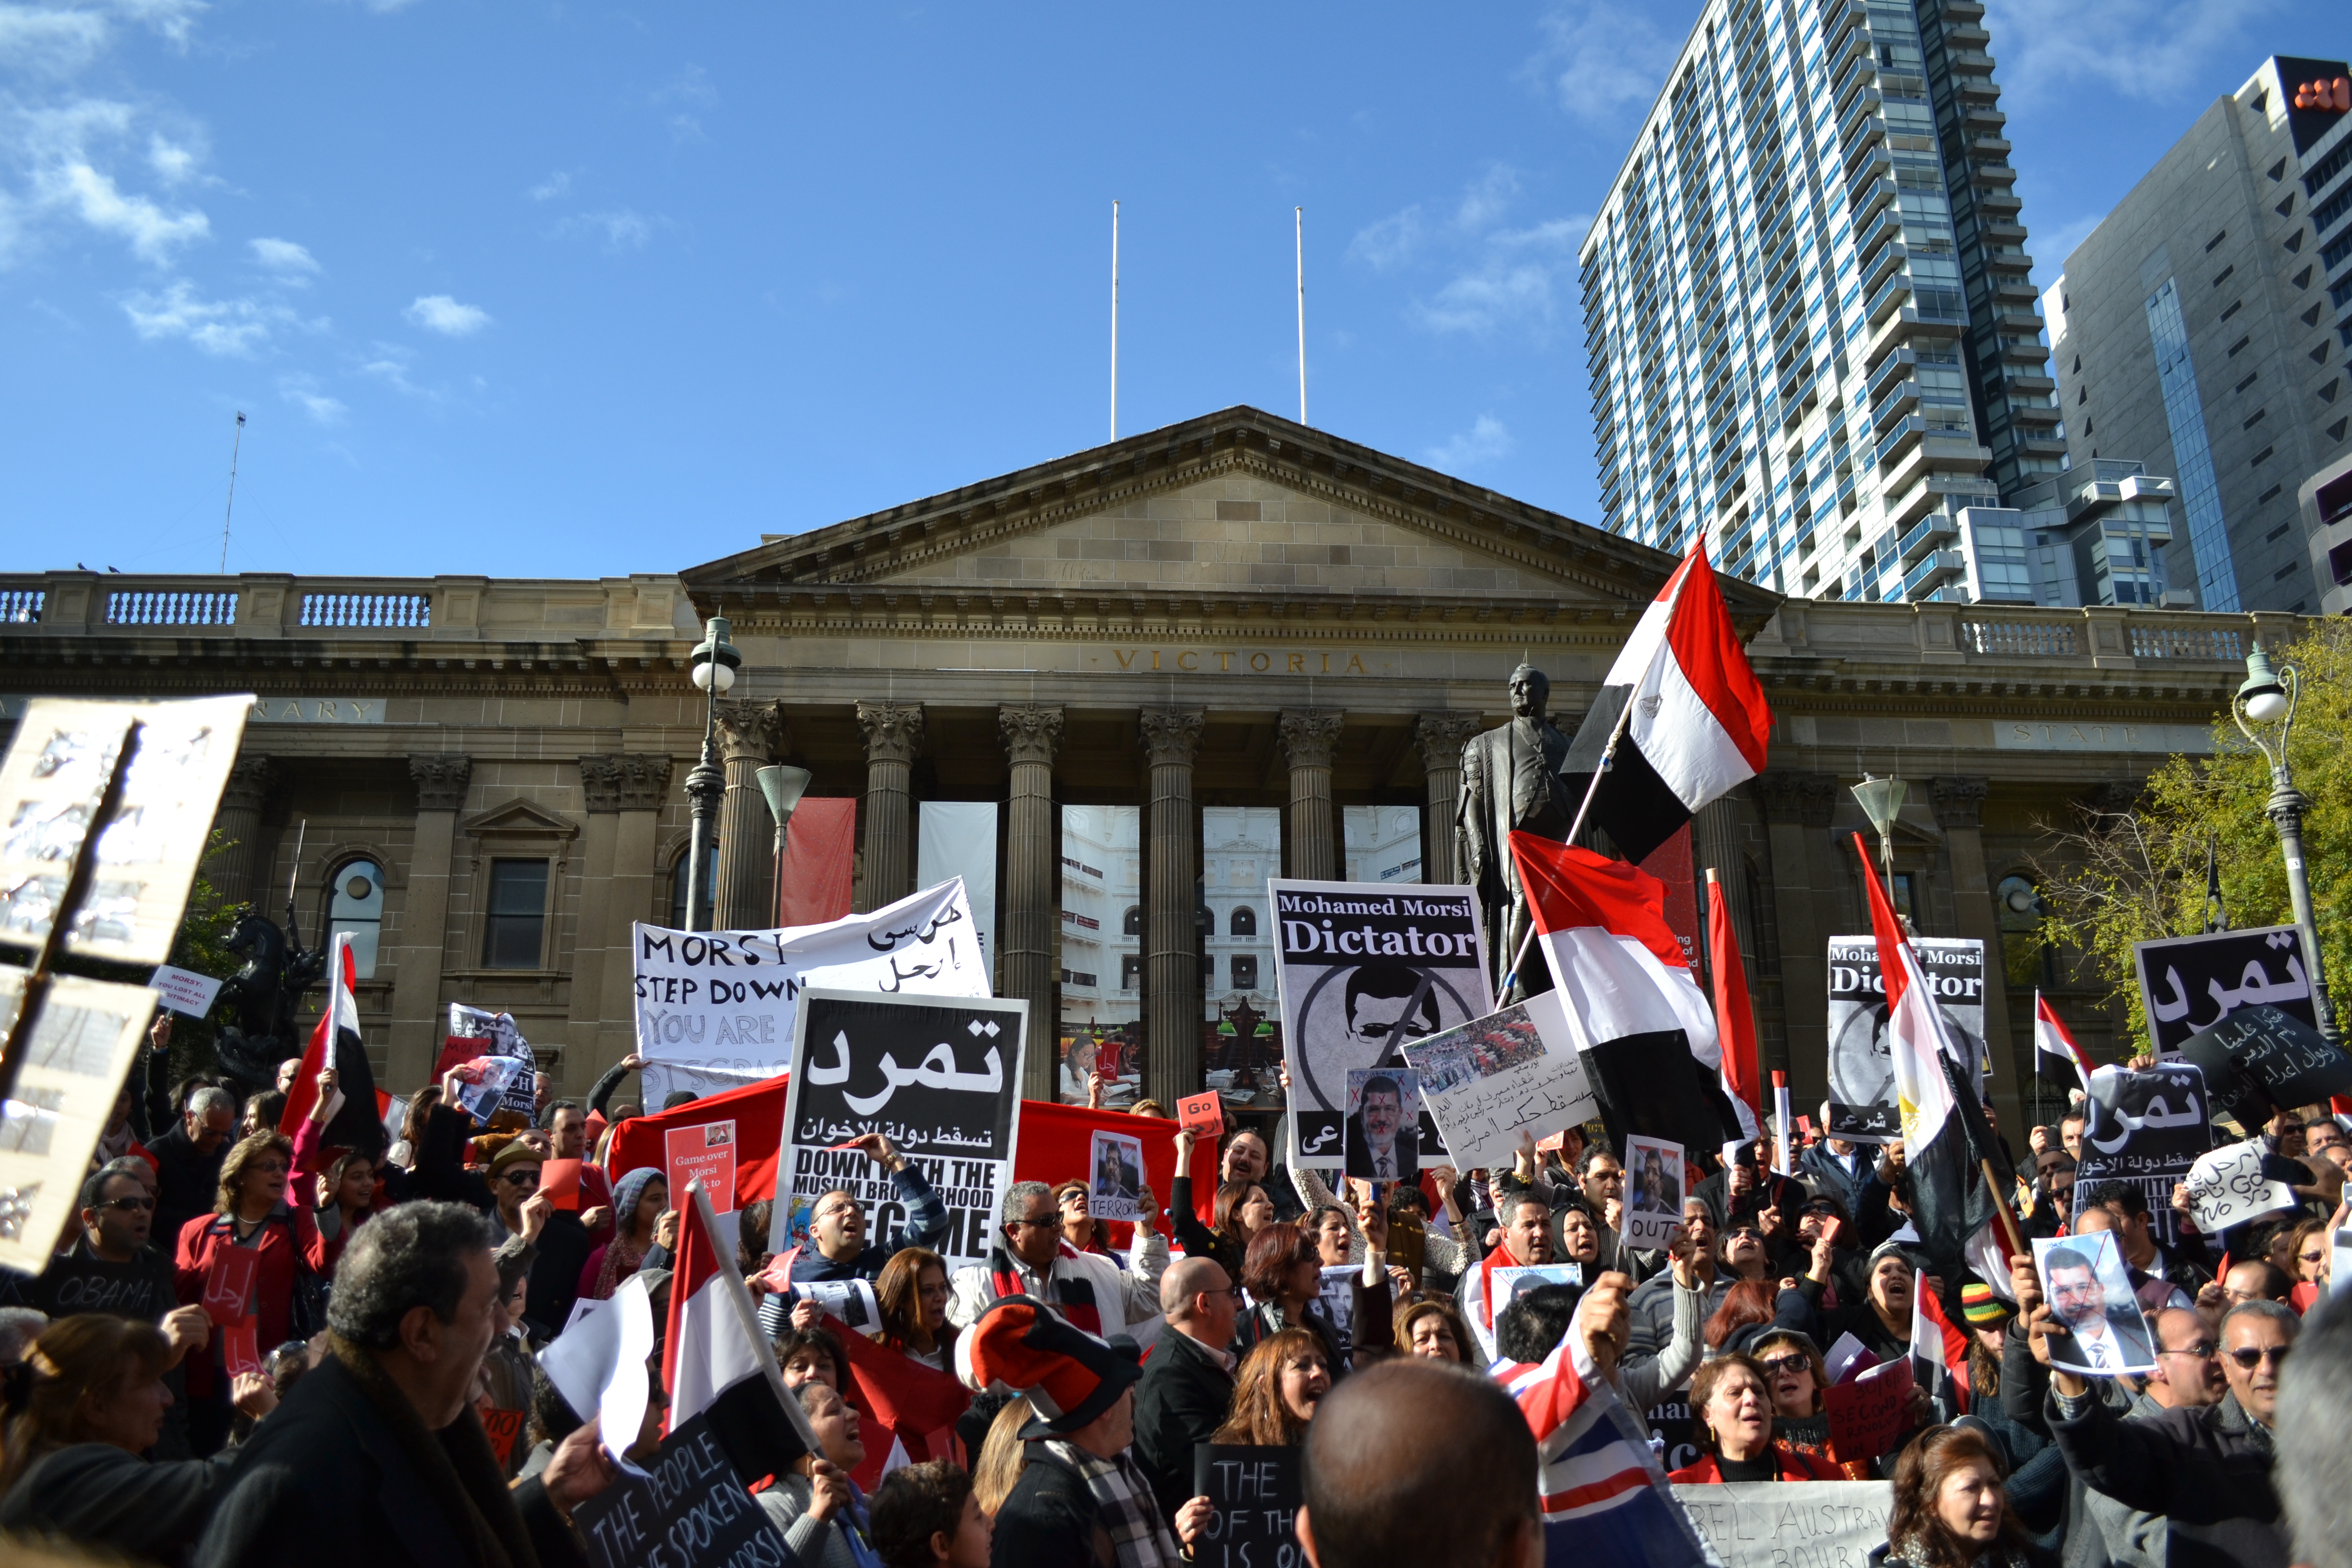 Crowds gathered at Melbourne's State Library